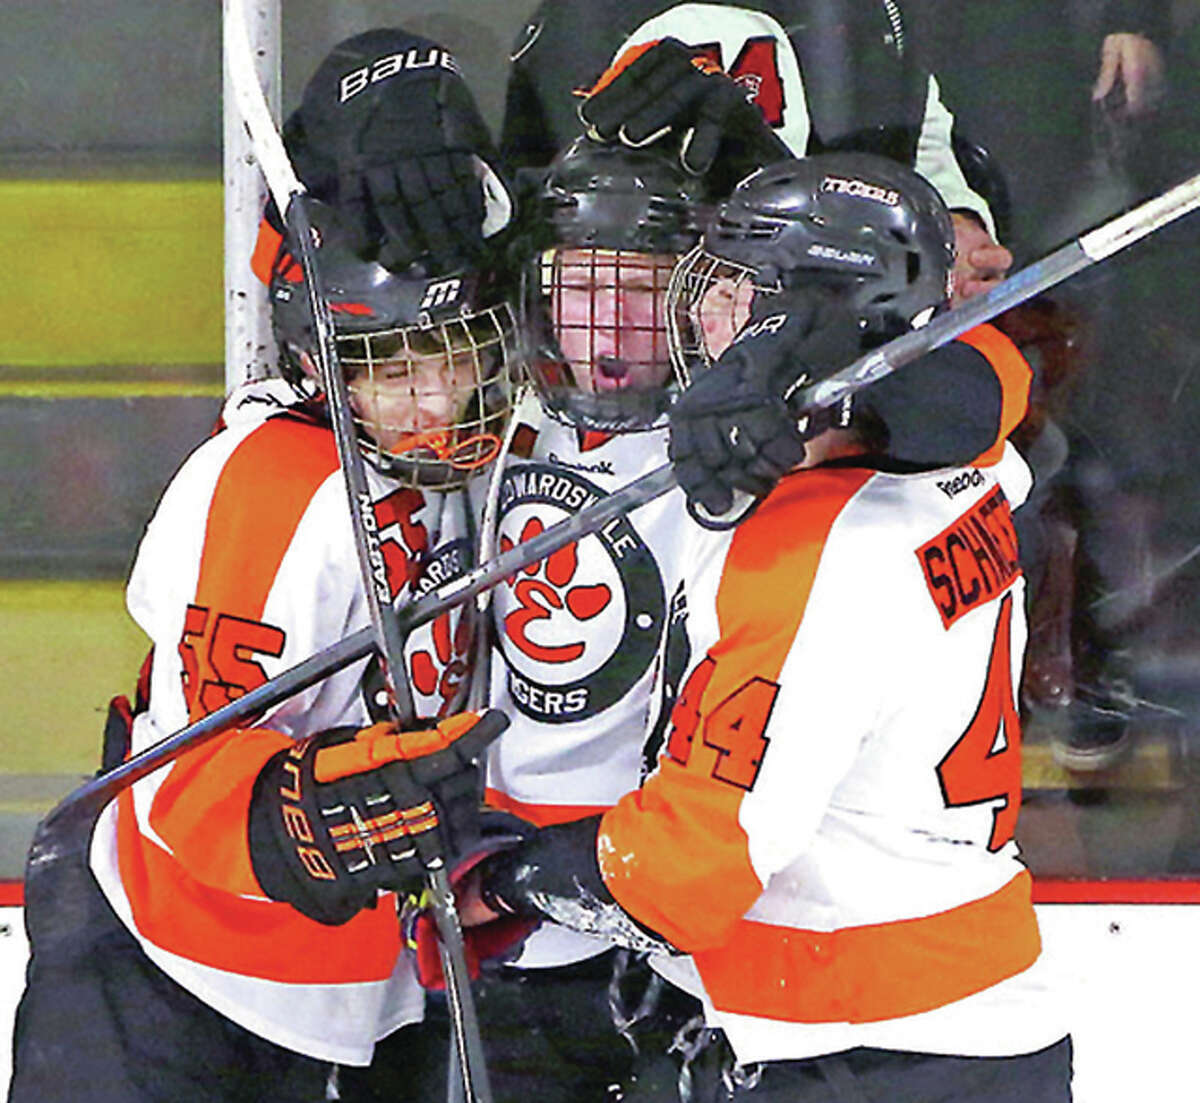 Edwardsville’s Tyler Hinterser, center, scored a goal early in the third period and then in the final minute in his team’s 4-2 loss to Brookings, South Dakota Sunday in the quarterfinals of the USA Hockey High School Nationals in Reston, Virginia.